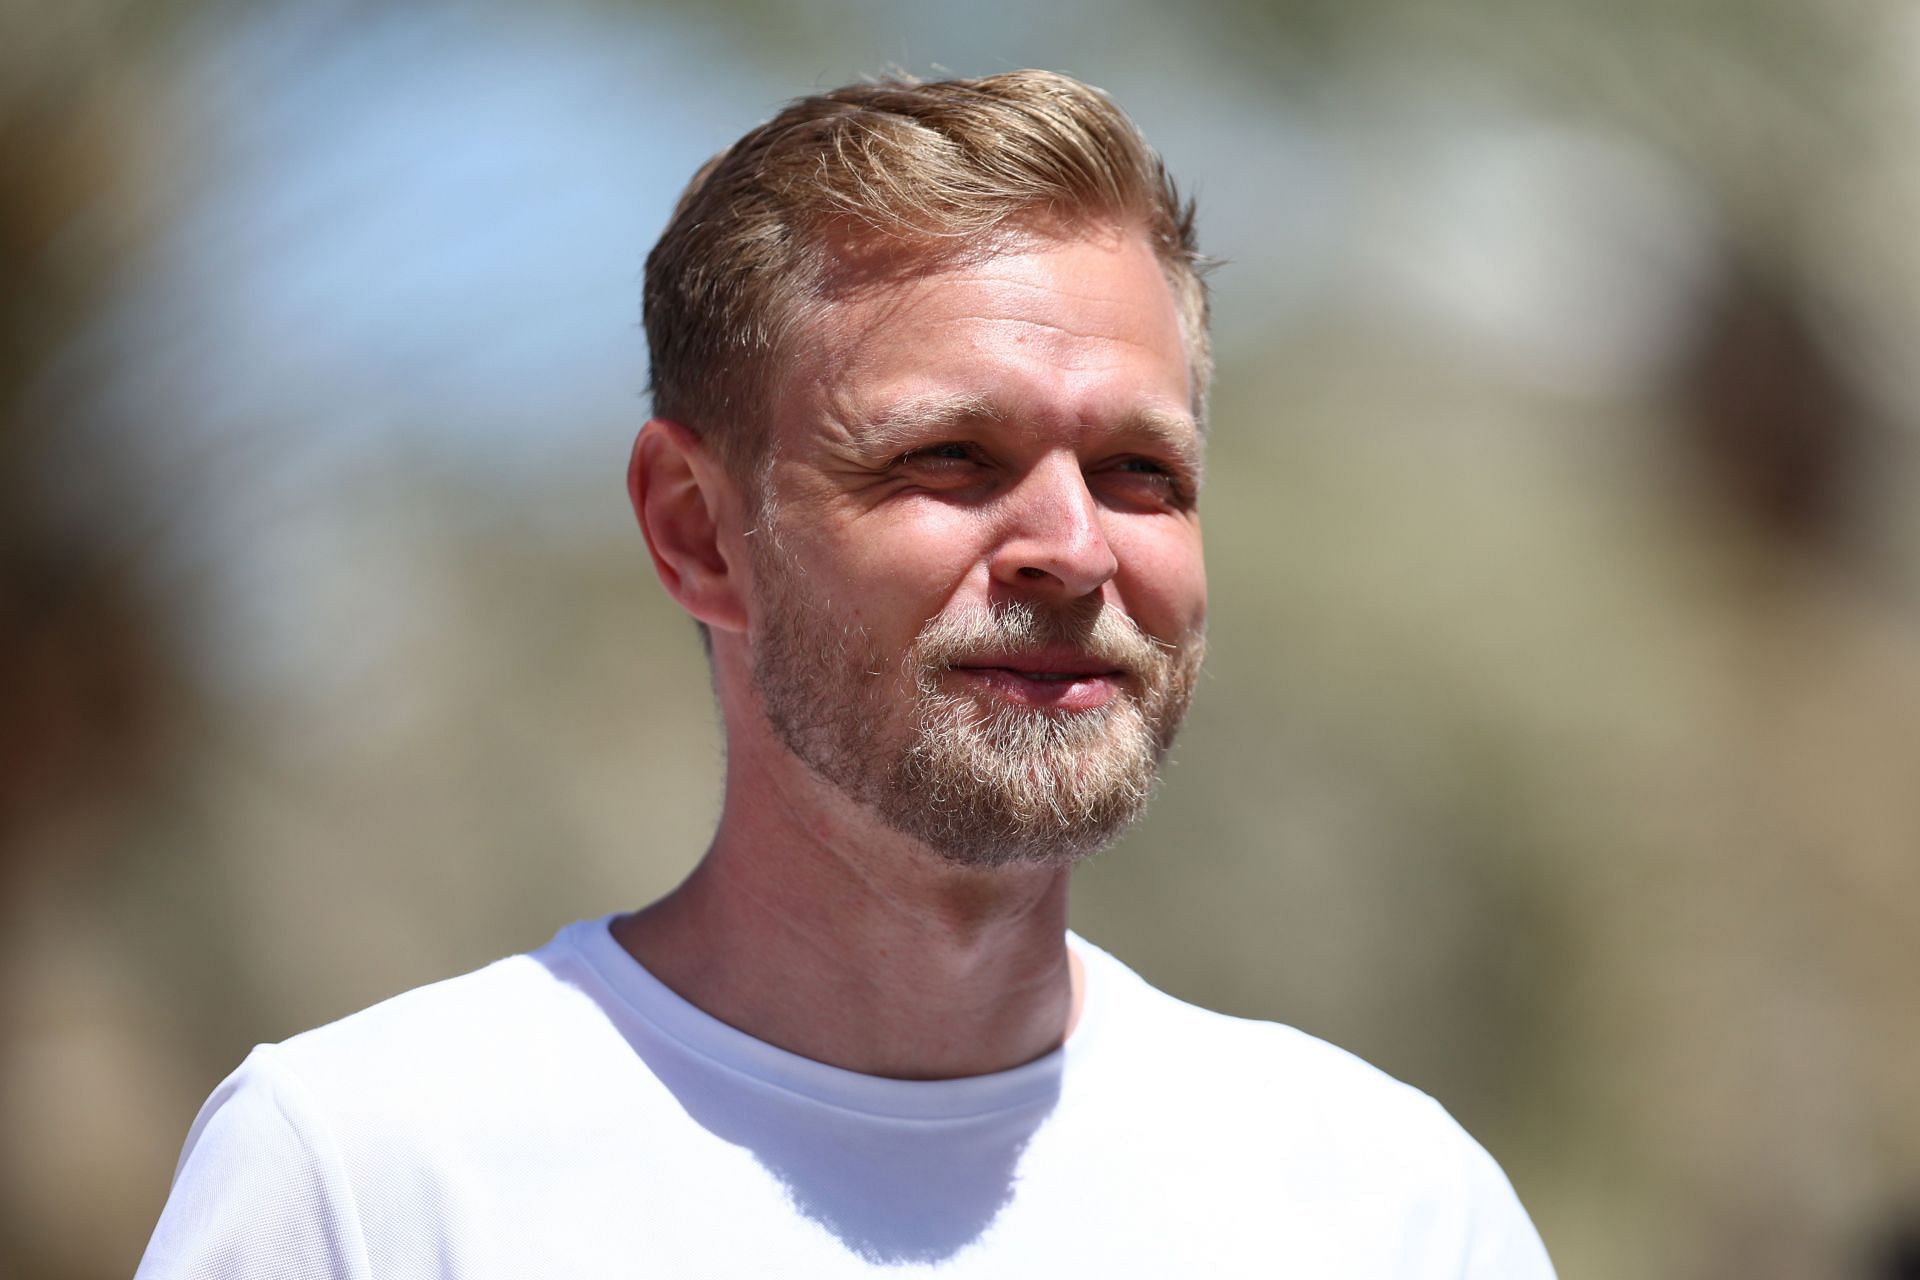 Kevin Magnussen was quite happy with how the first day went in Bahrain